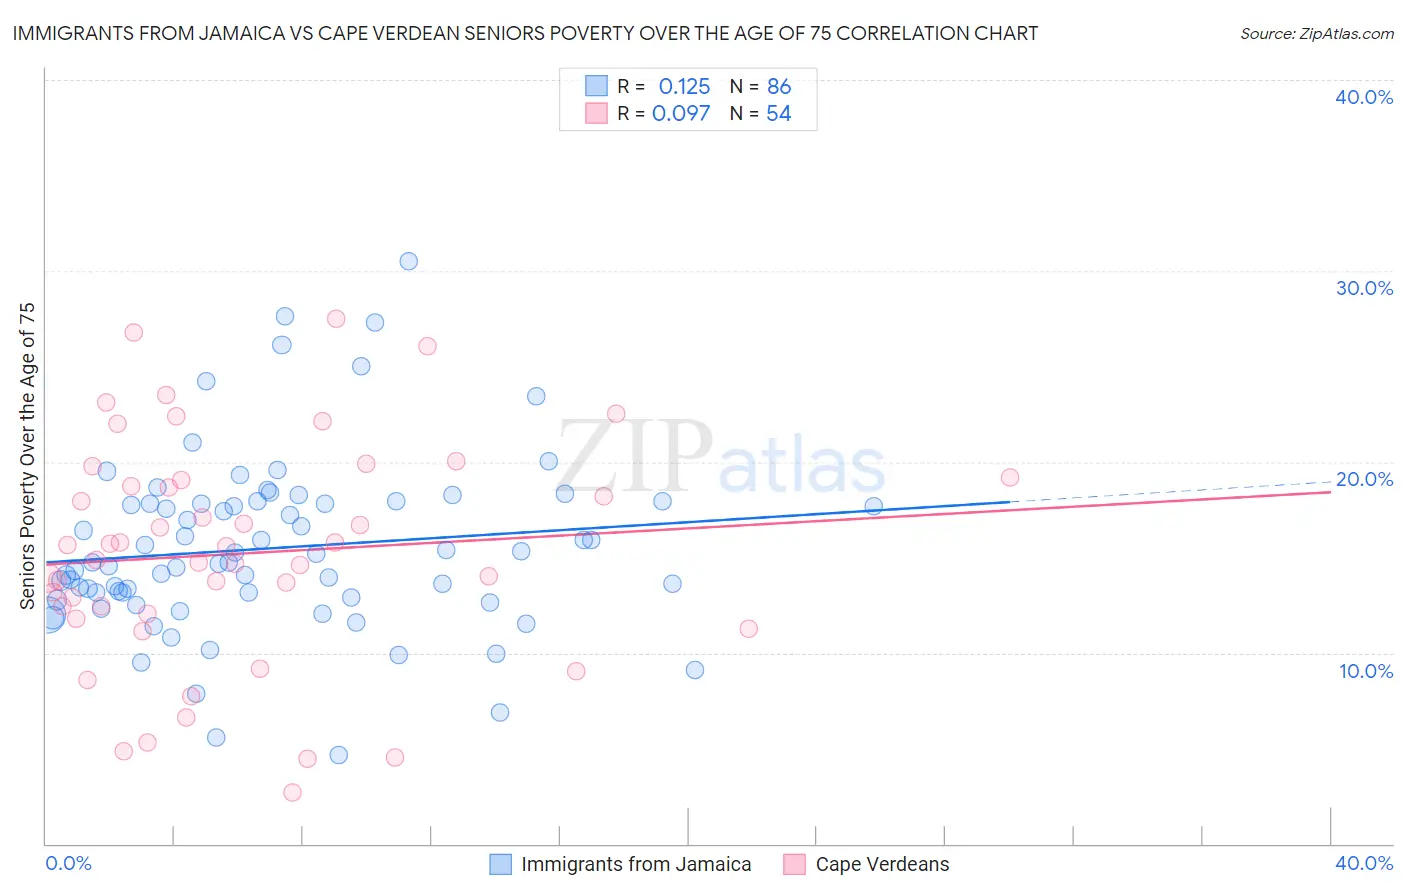 Immigrants from Jamaica vs Cape Verdean Seniors Poverty Over the Age of 75